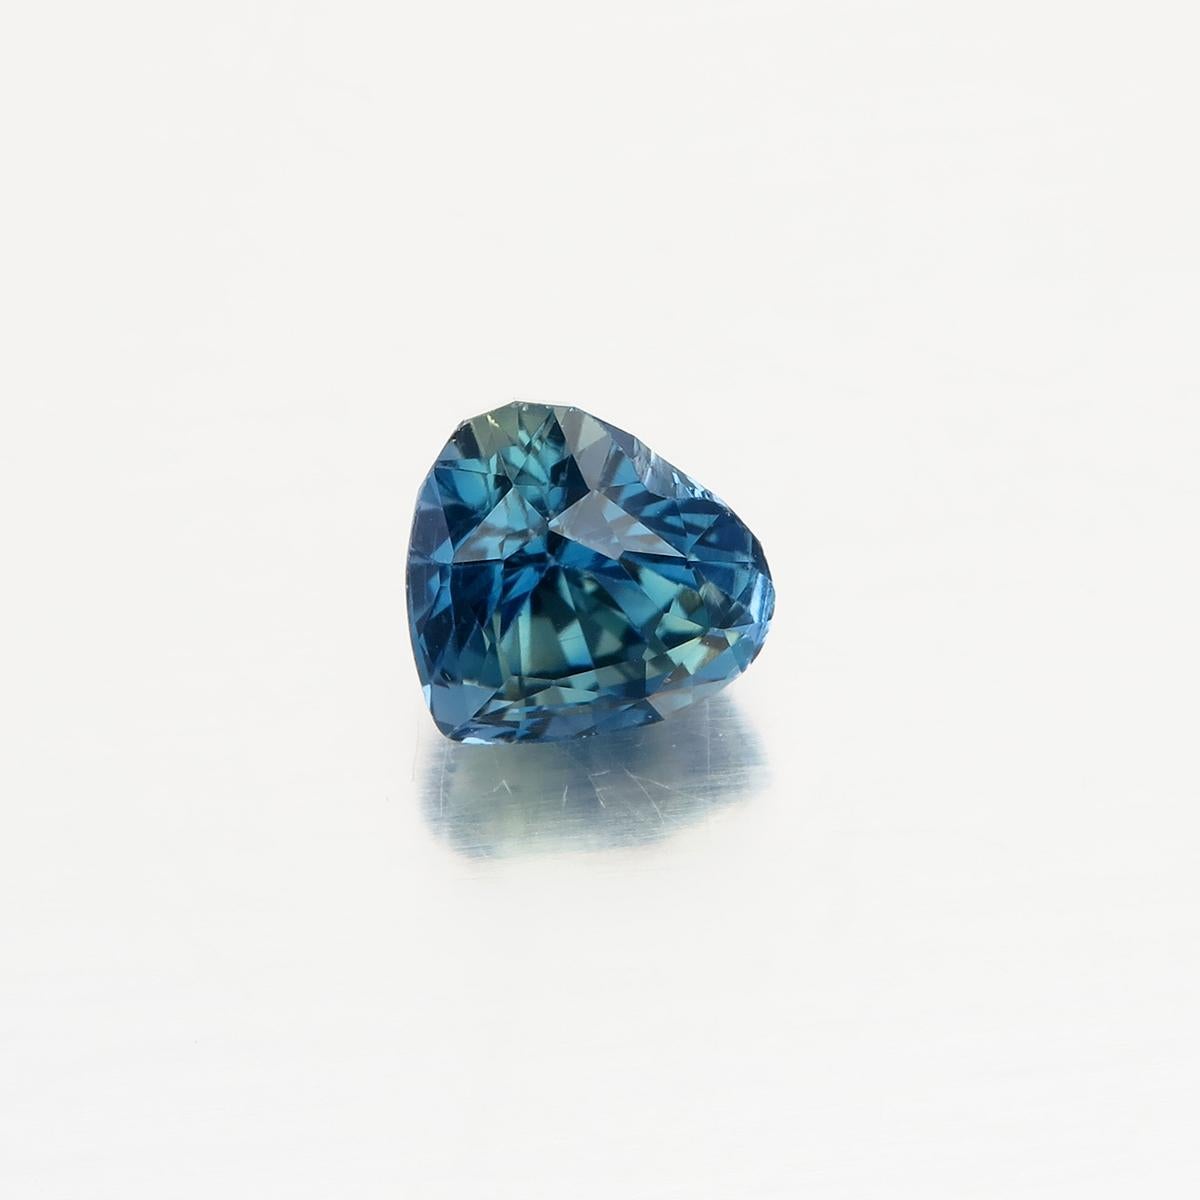 1.05 Carat Indigo Blue Sapphire from Ceylon Sri Lanka
Dimensions: 6.00 x 5.55 x 4.28 mm
Shape: Heart Faceted
Weight: 1.05 carat
Color: The dusky blue color of this gem earns it the Lotus 